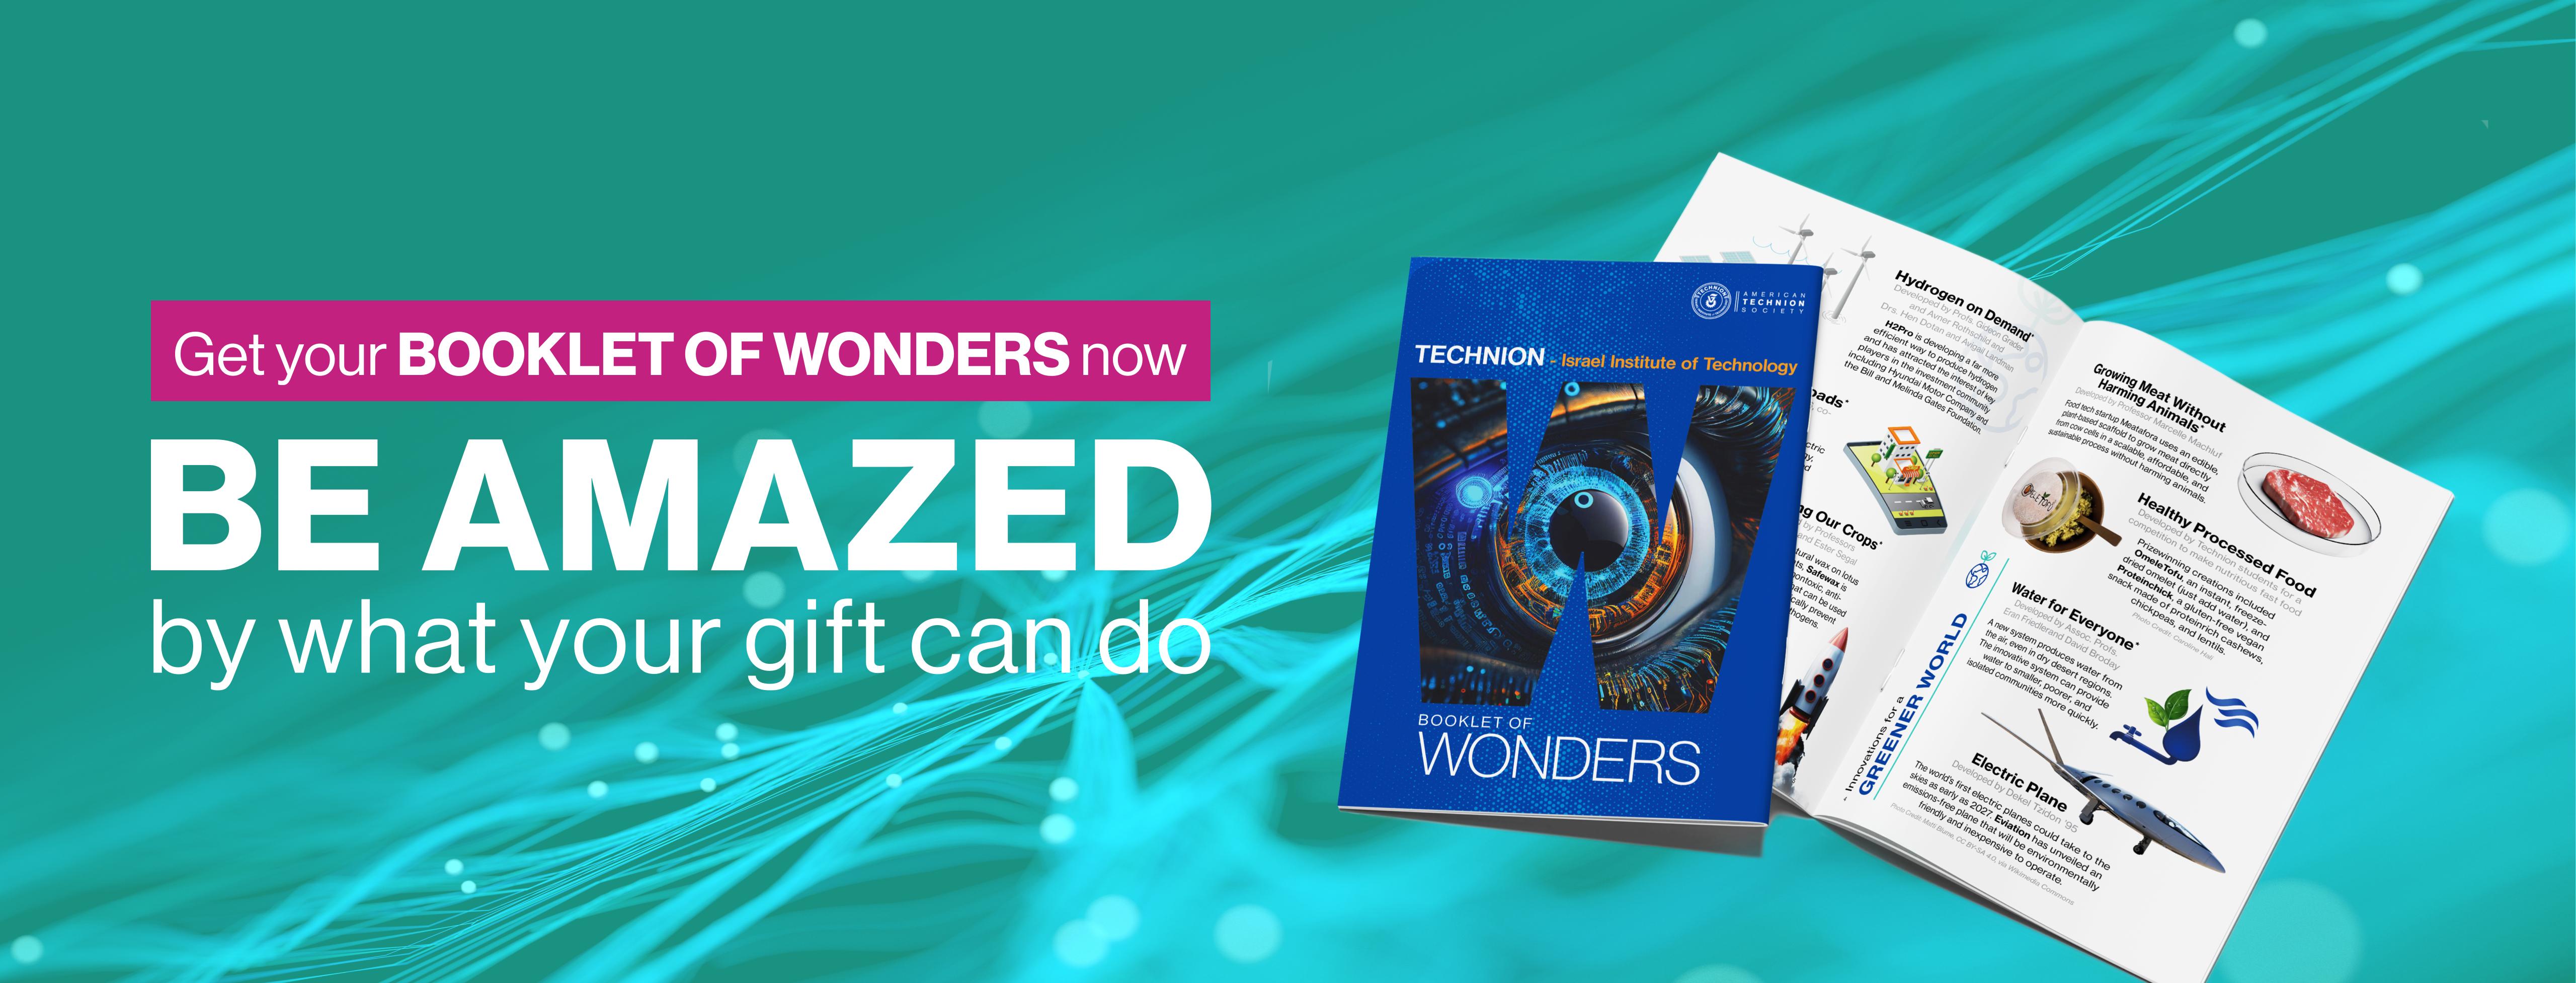 Text on the left reading "Get your Booklet of Wonders now. BE AMAZED by what you gift can do." against a blue background. On the right, the cover of the Booklet of Wonders and a snapshot of its contents is shown.